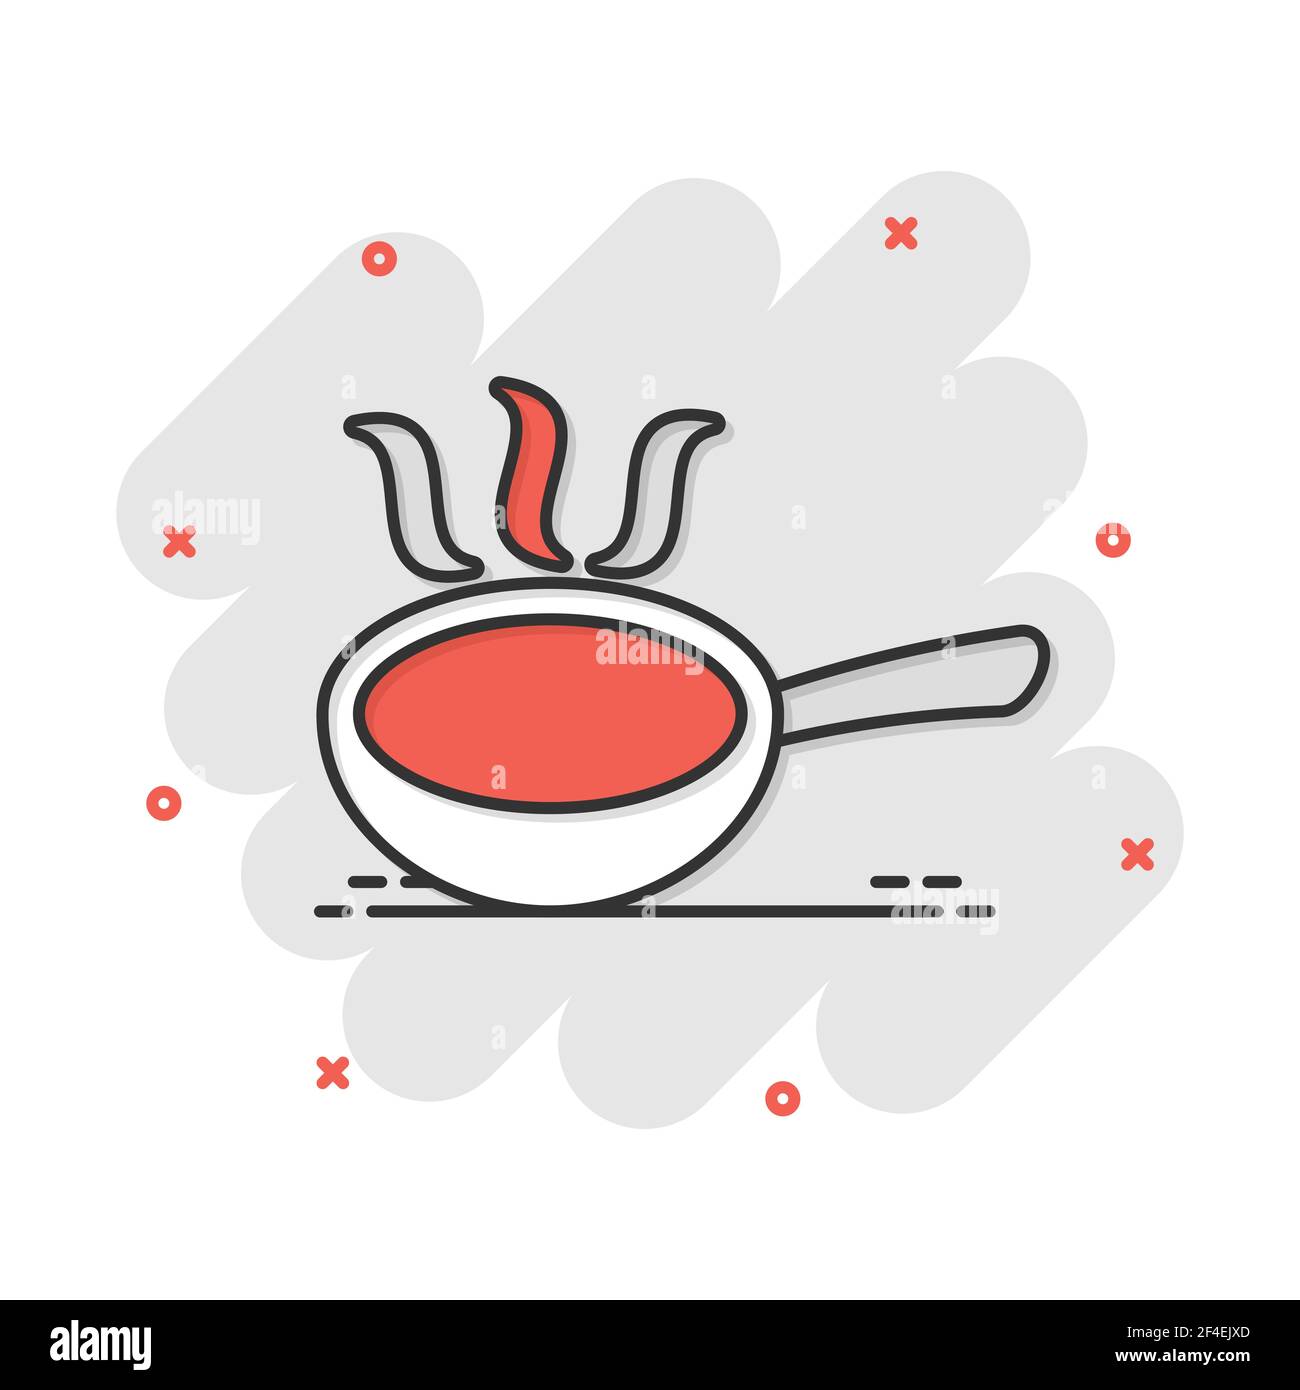 Vector cartoon frying pan icon in comic style. Cooking pan concept illustration pictogram. Skillet kitchen equipment business splash effect concept. Stock Vector